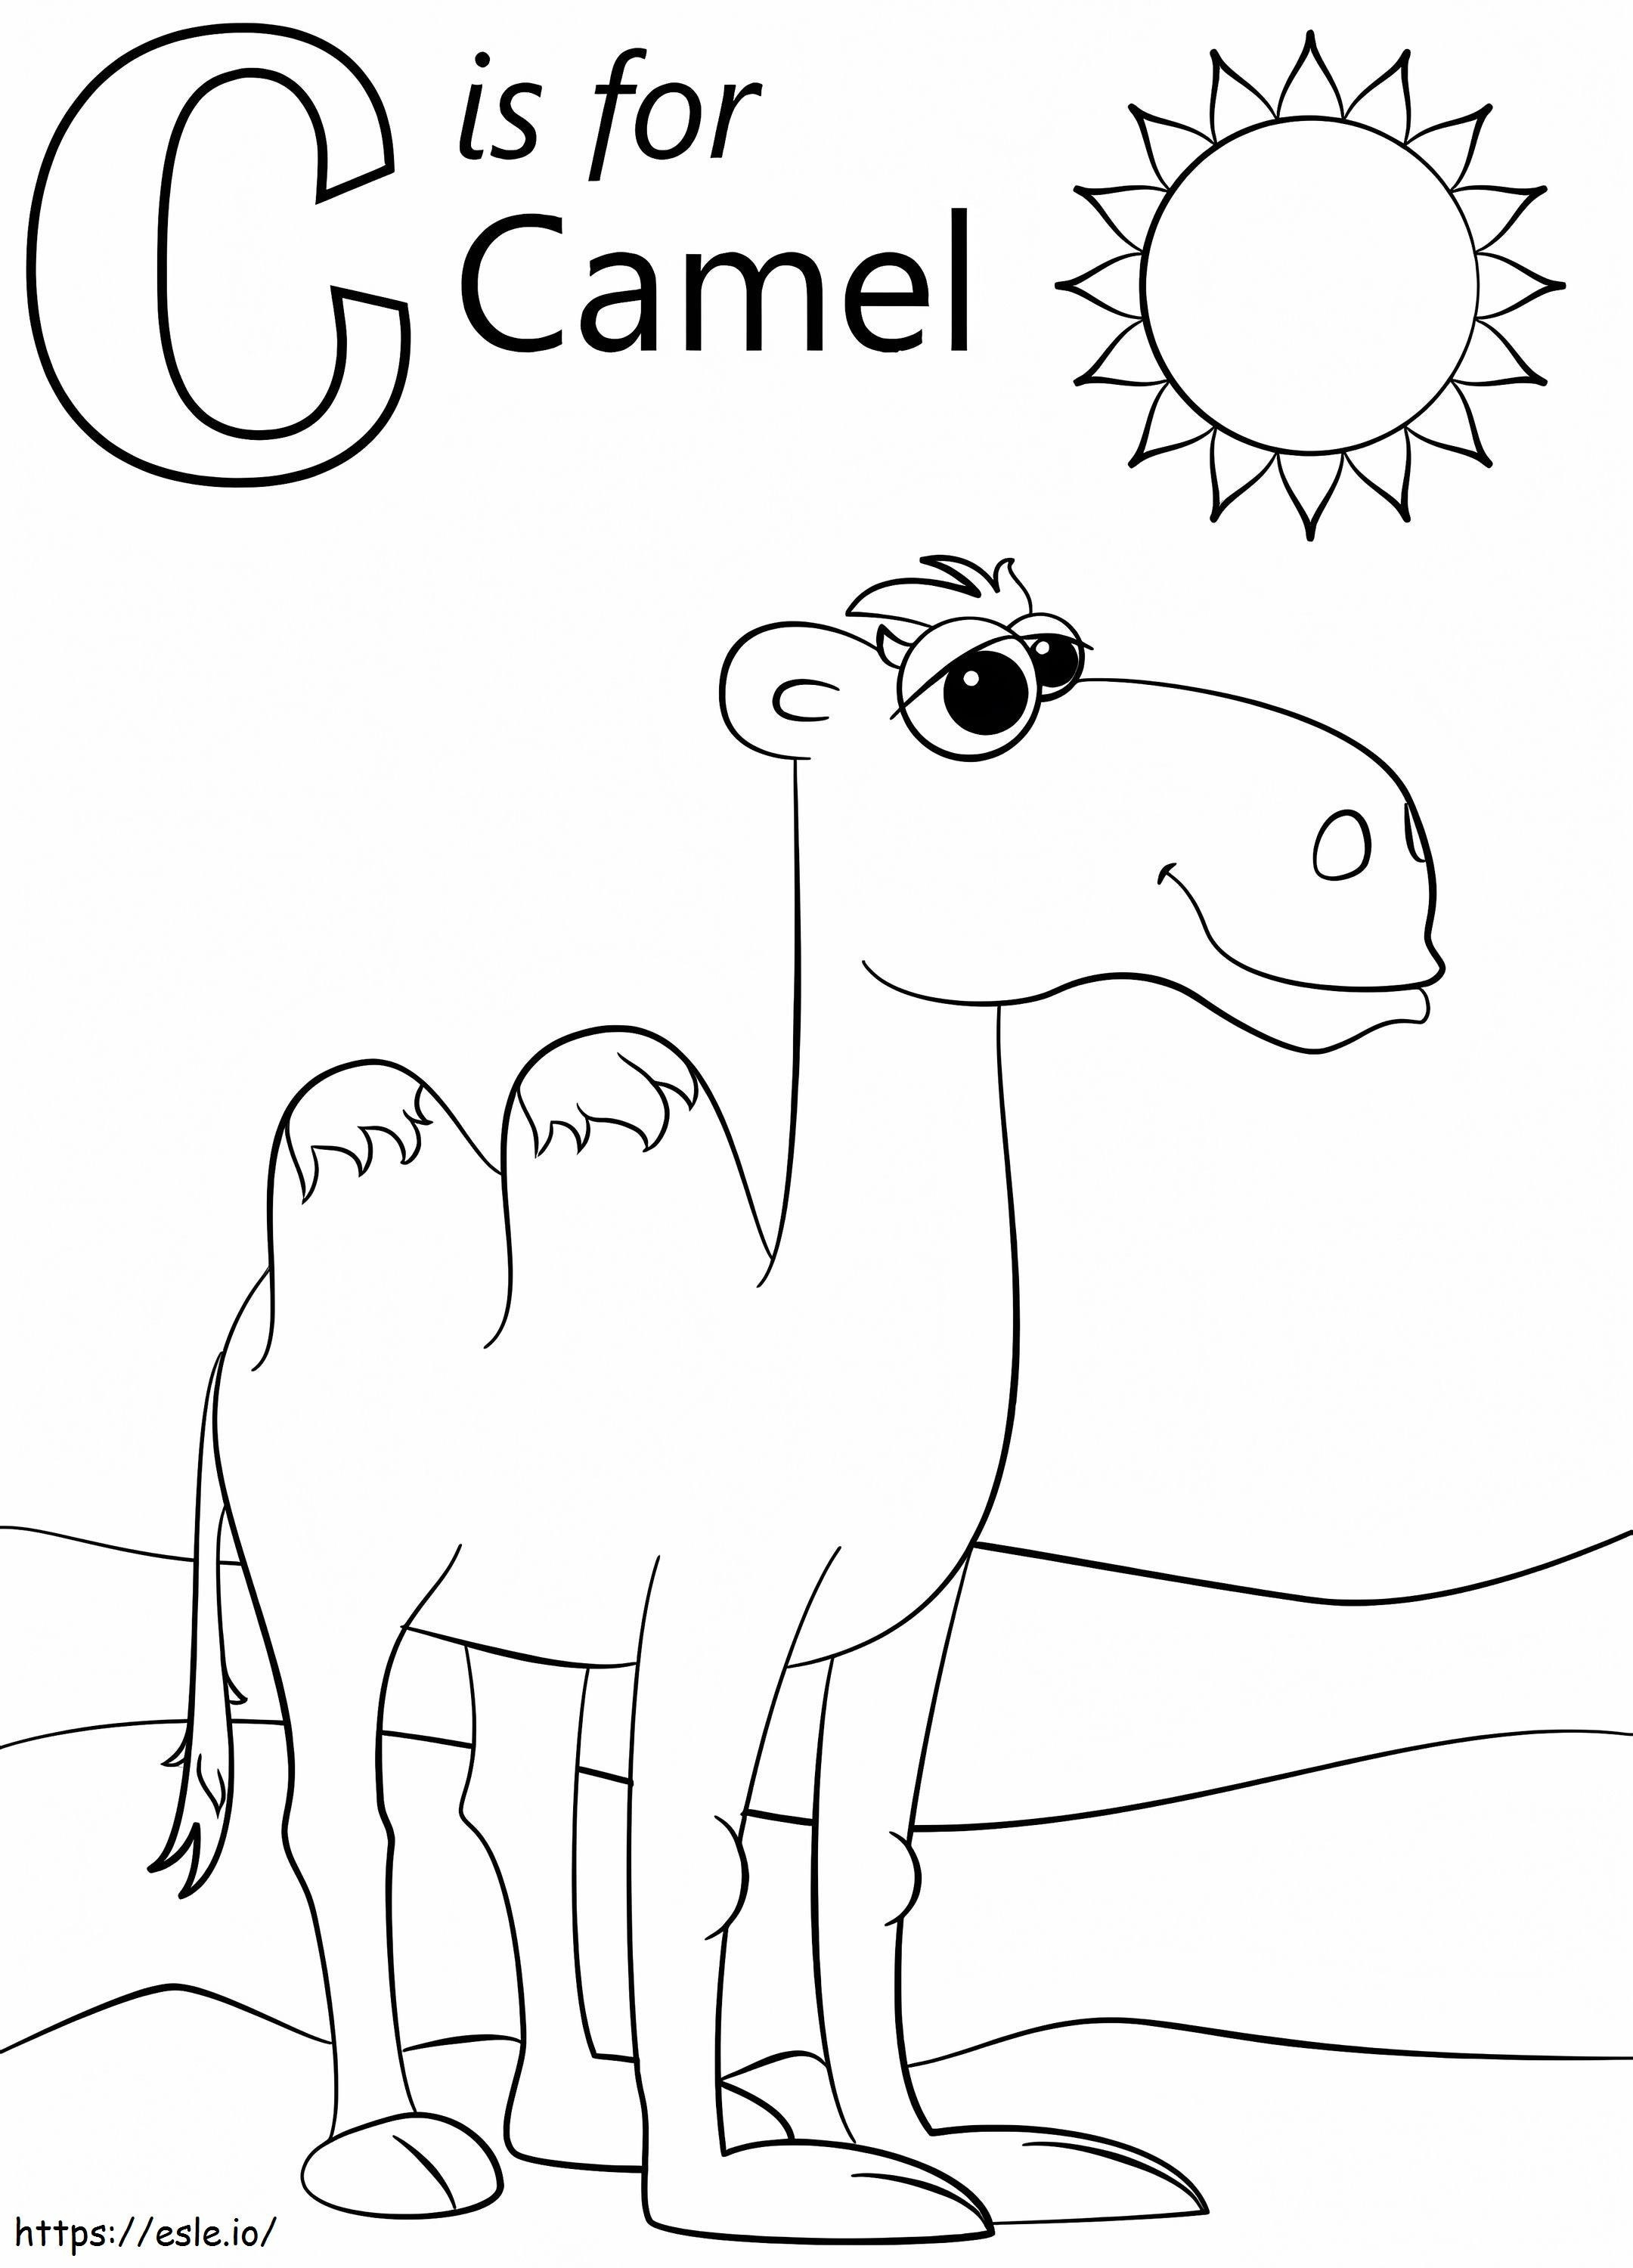 Camel Letter C coloring page